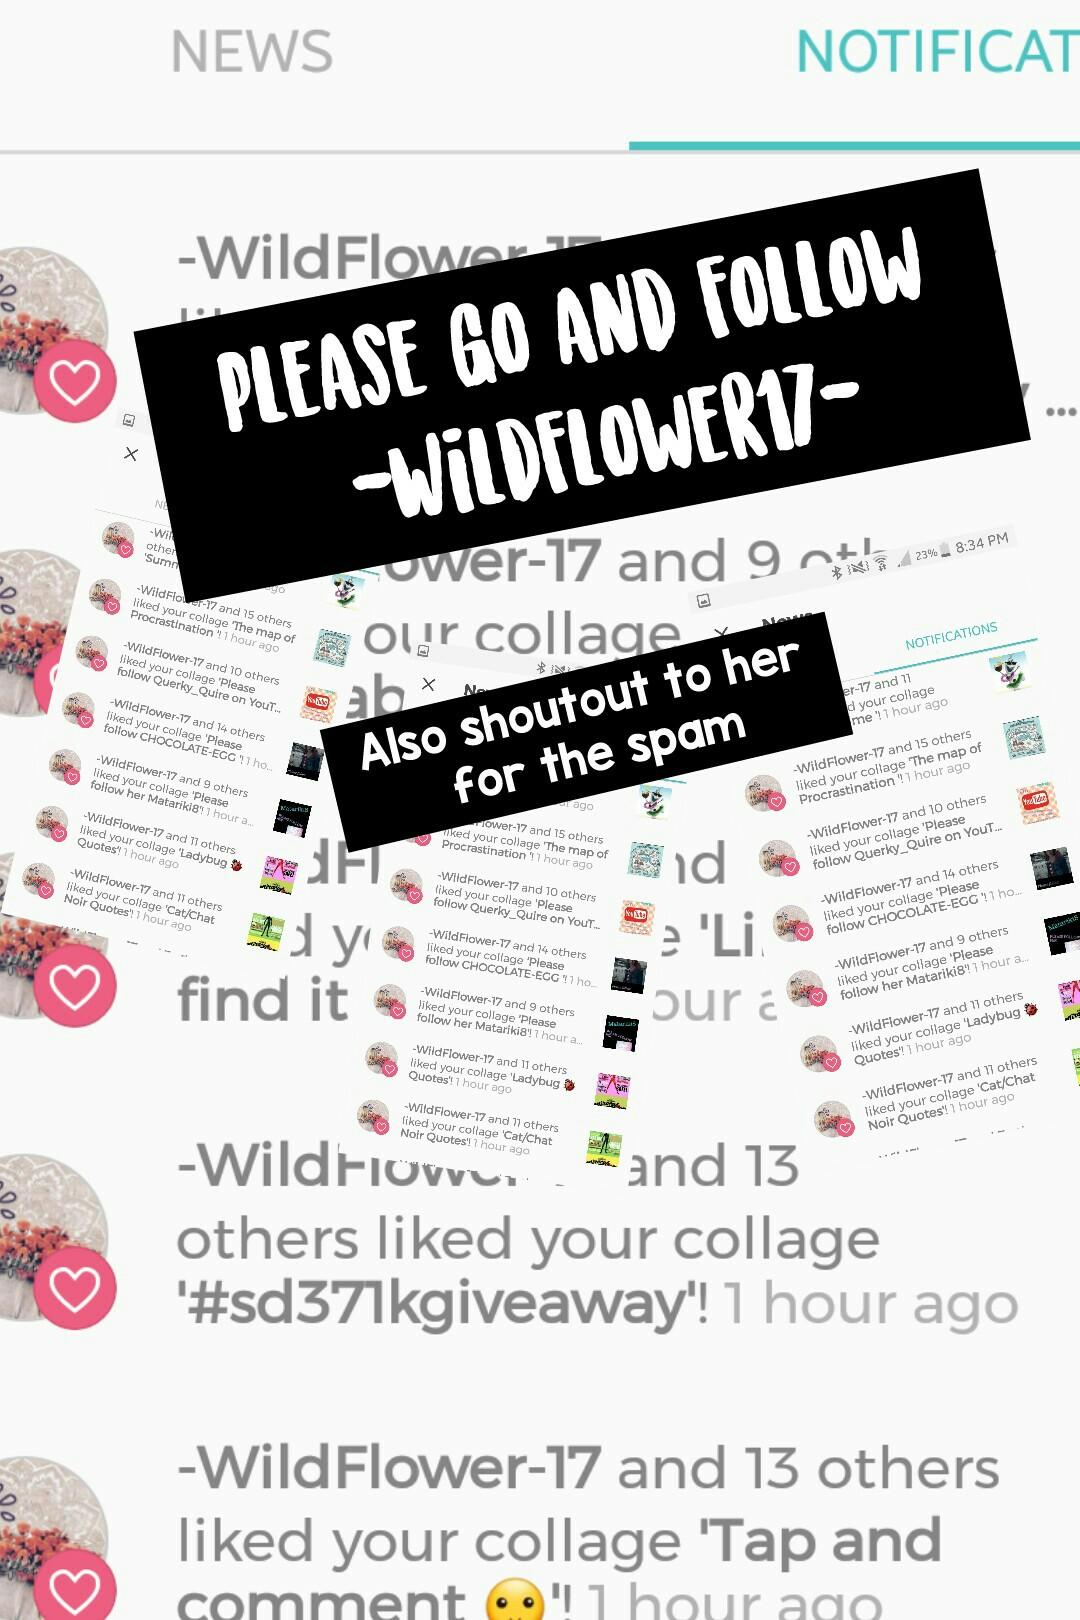 Please go and follow -Wildflower17-